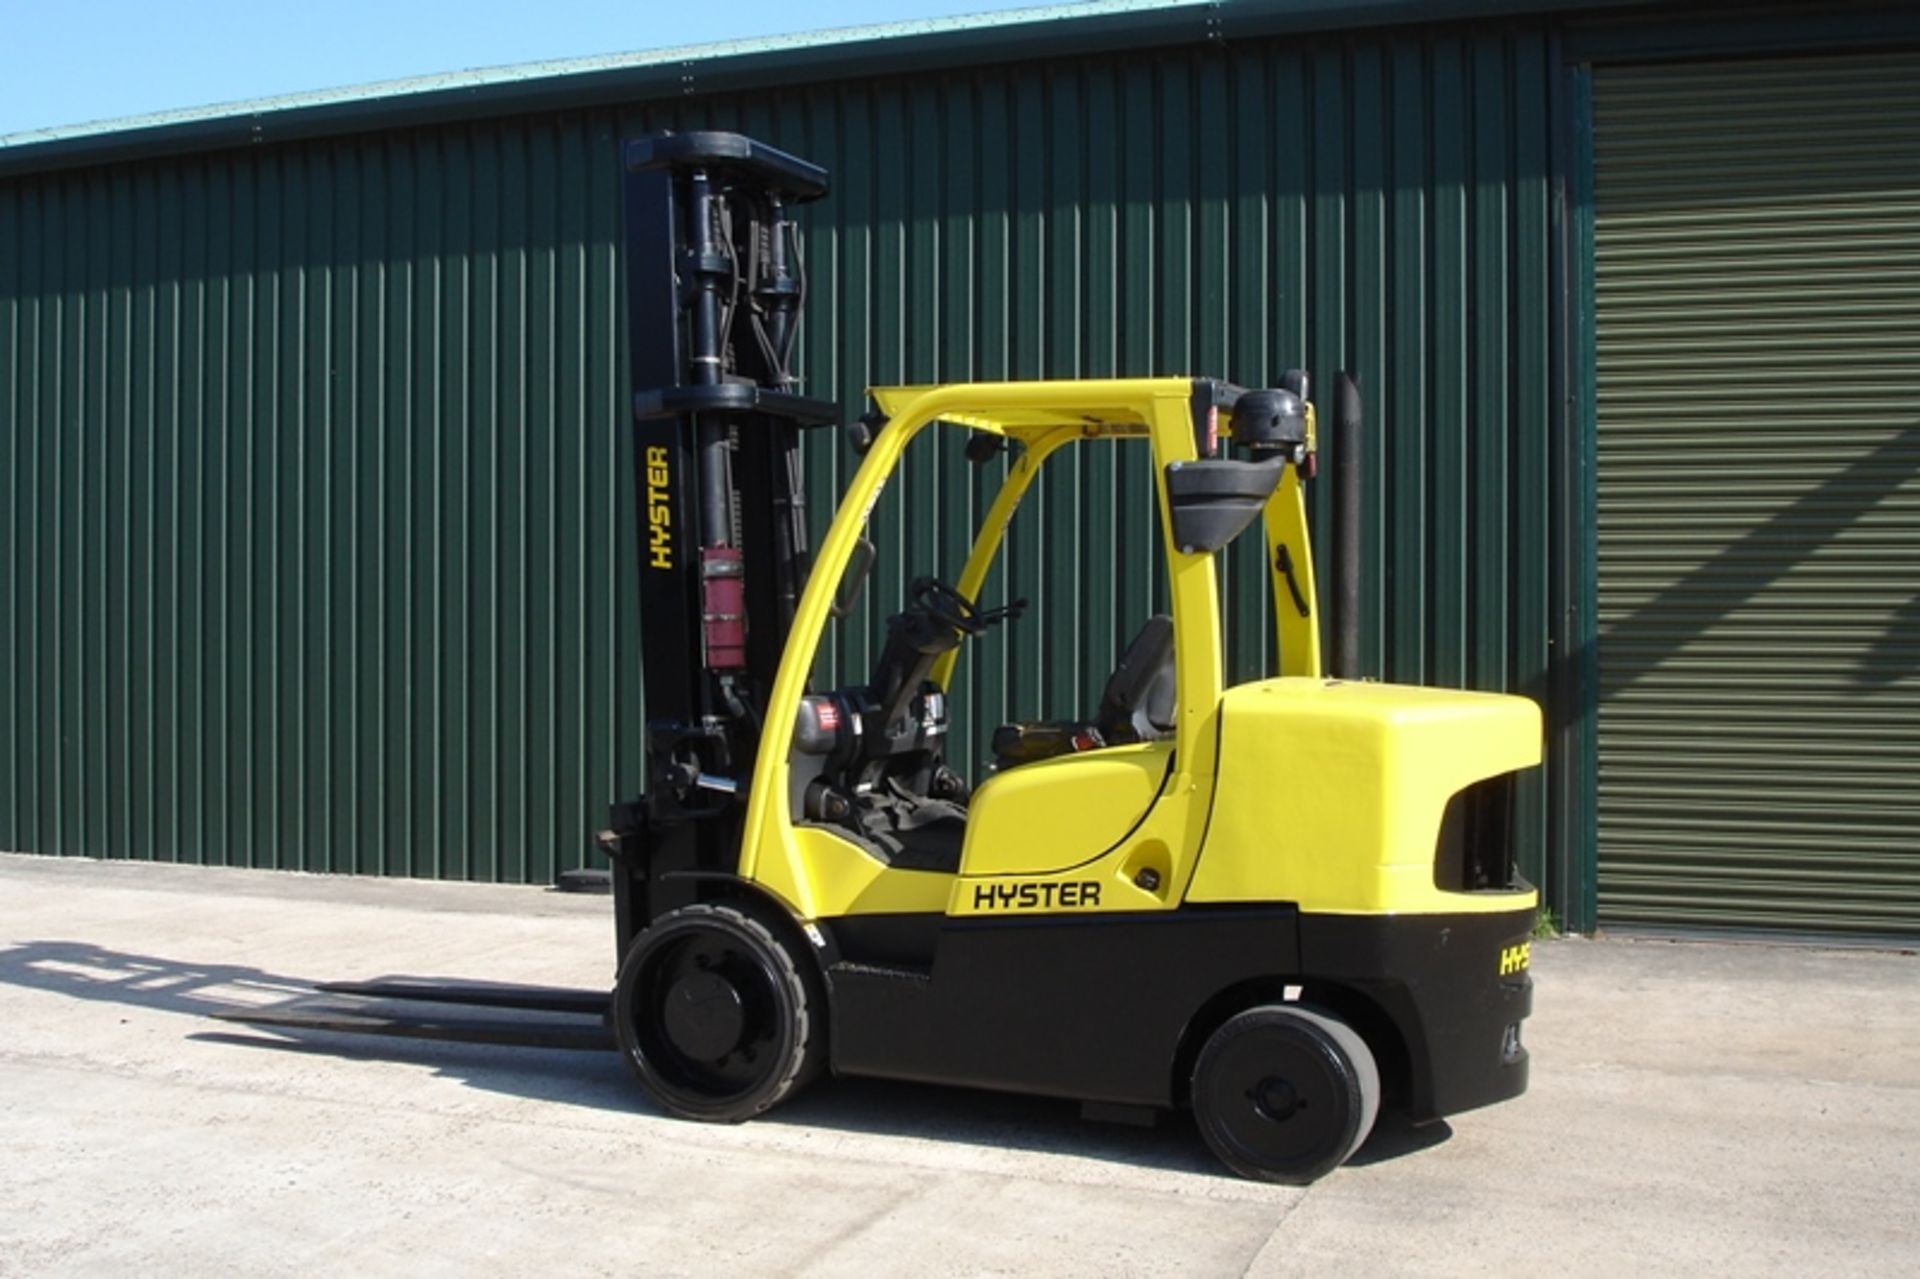 HYSTER COMPACT 7 TON FORKLIFT (2009)